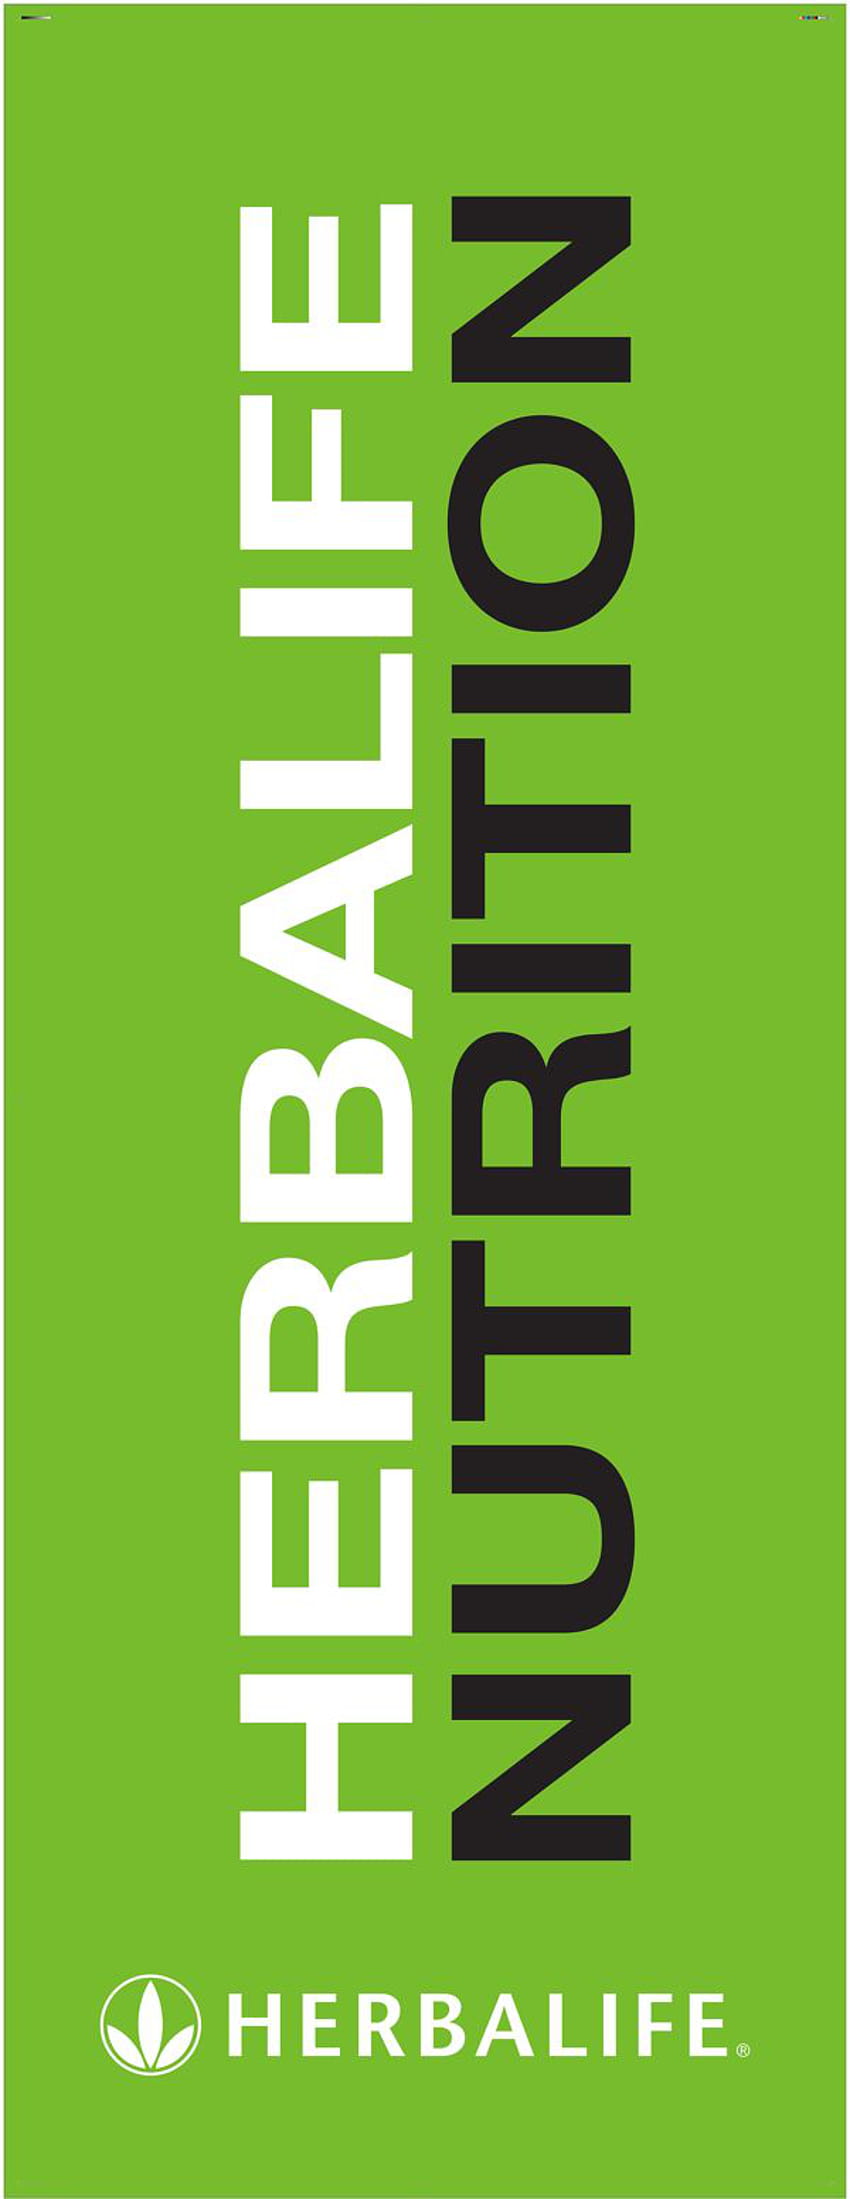 Herbalife Nutrition Campaign by Lucy Crookston, via Behance loose, herbalife iphone HD phone wallpaper